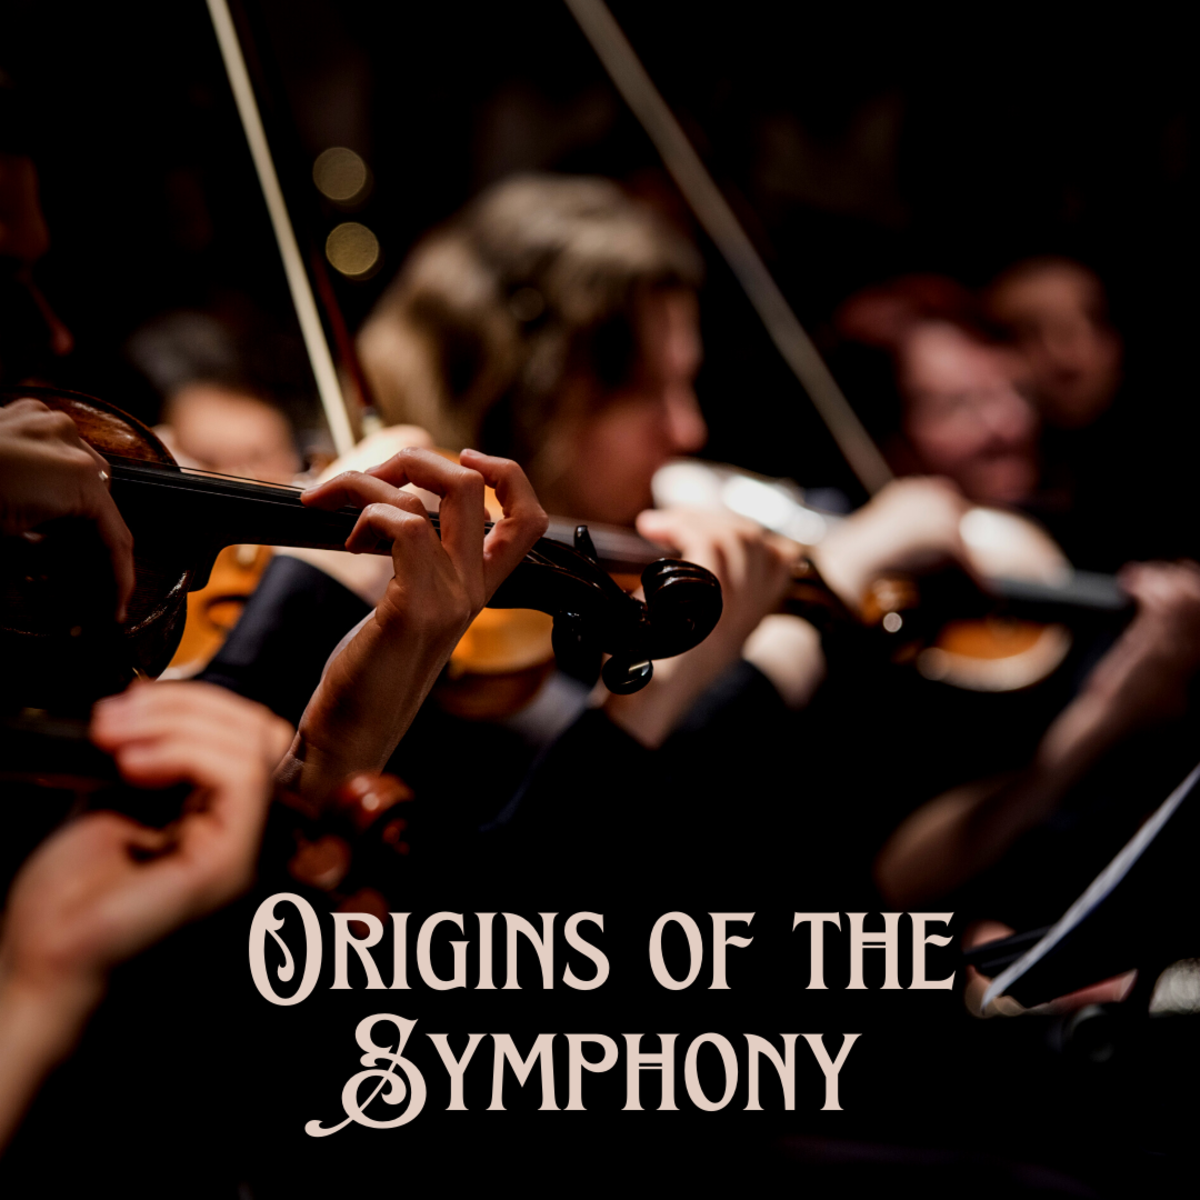 Read all about the early history of the symphony orchestra.